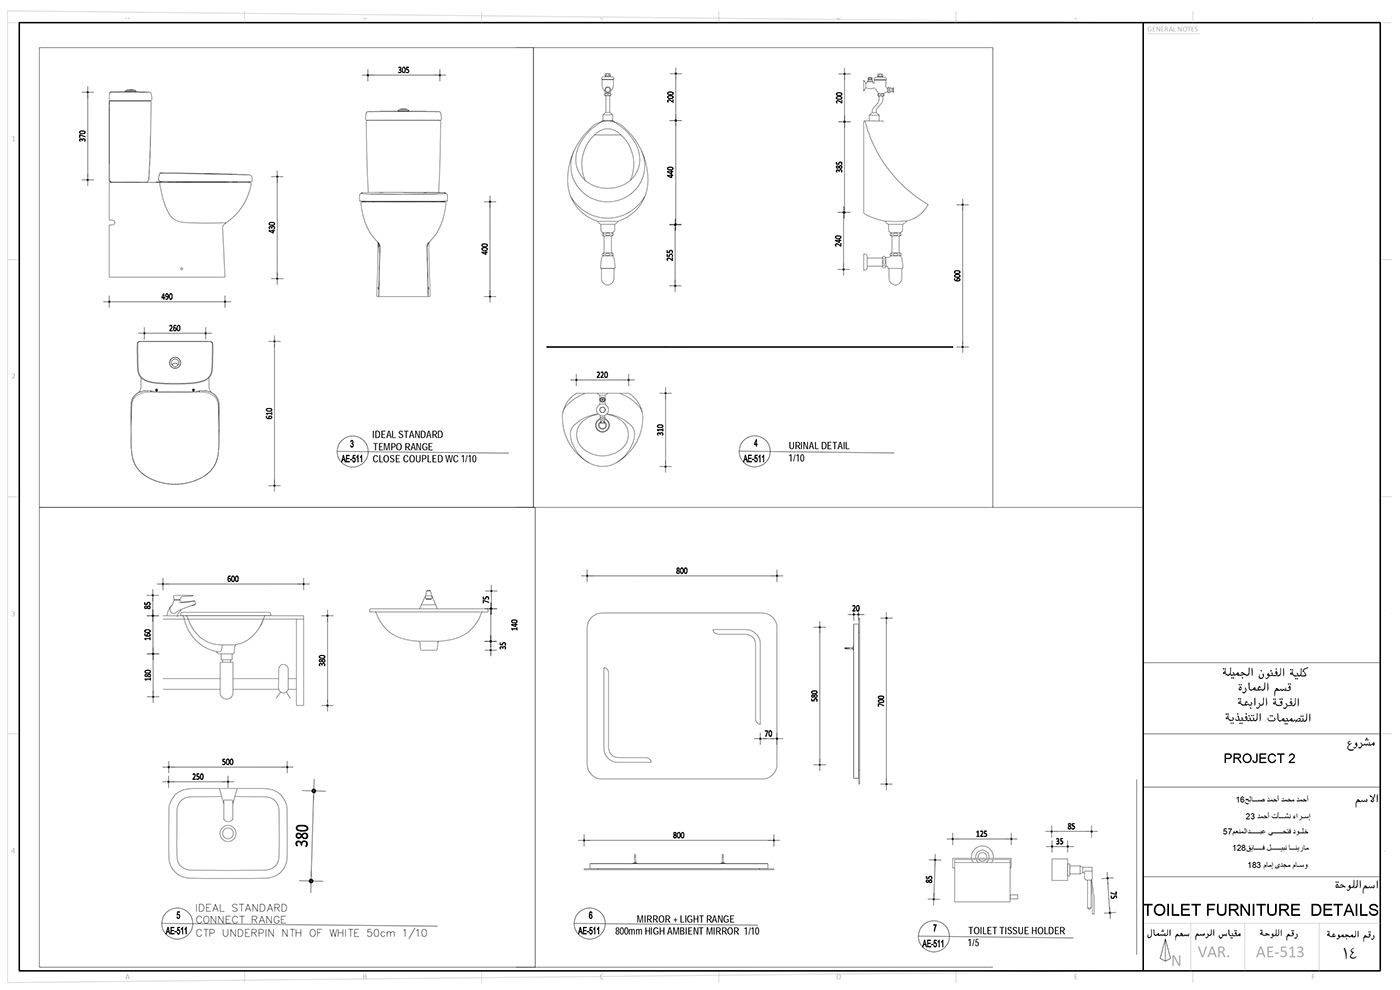 administrative cad design Shop Drawings working